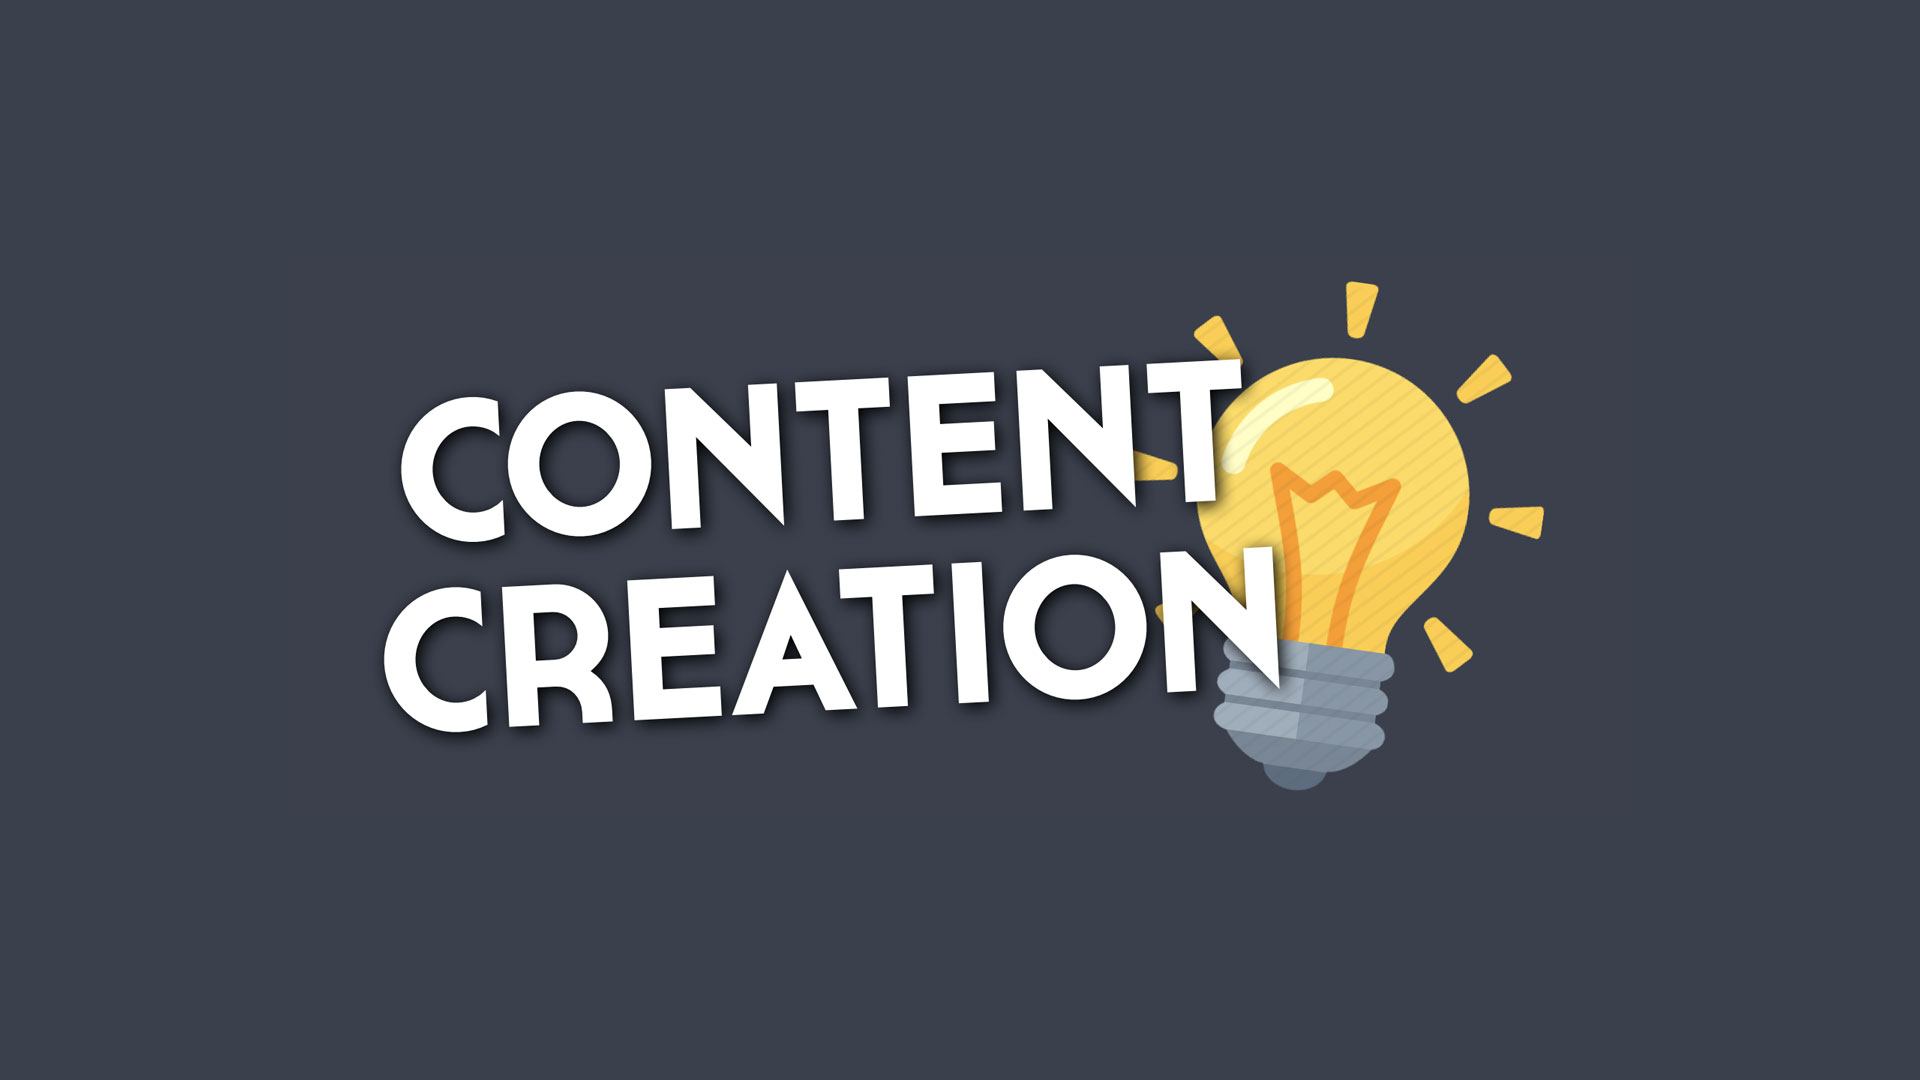 Creative content. Контент. Content Creation. Create content. In content.